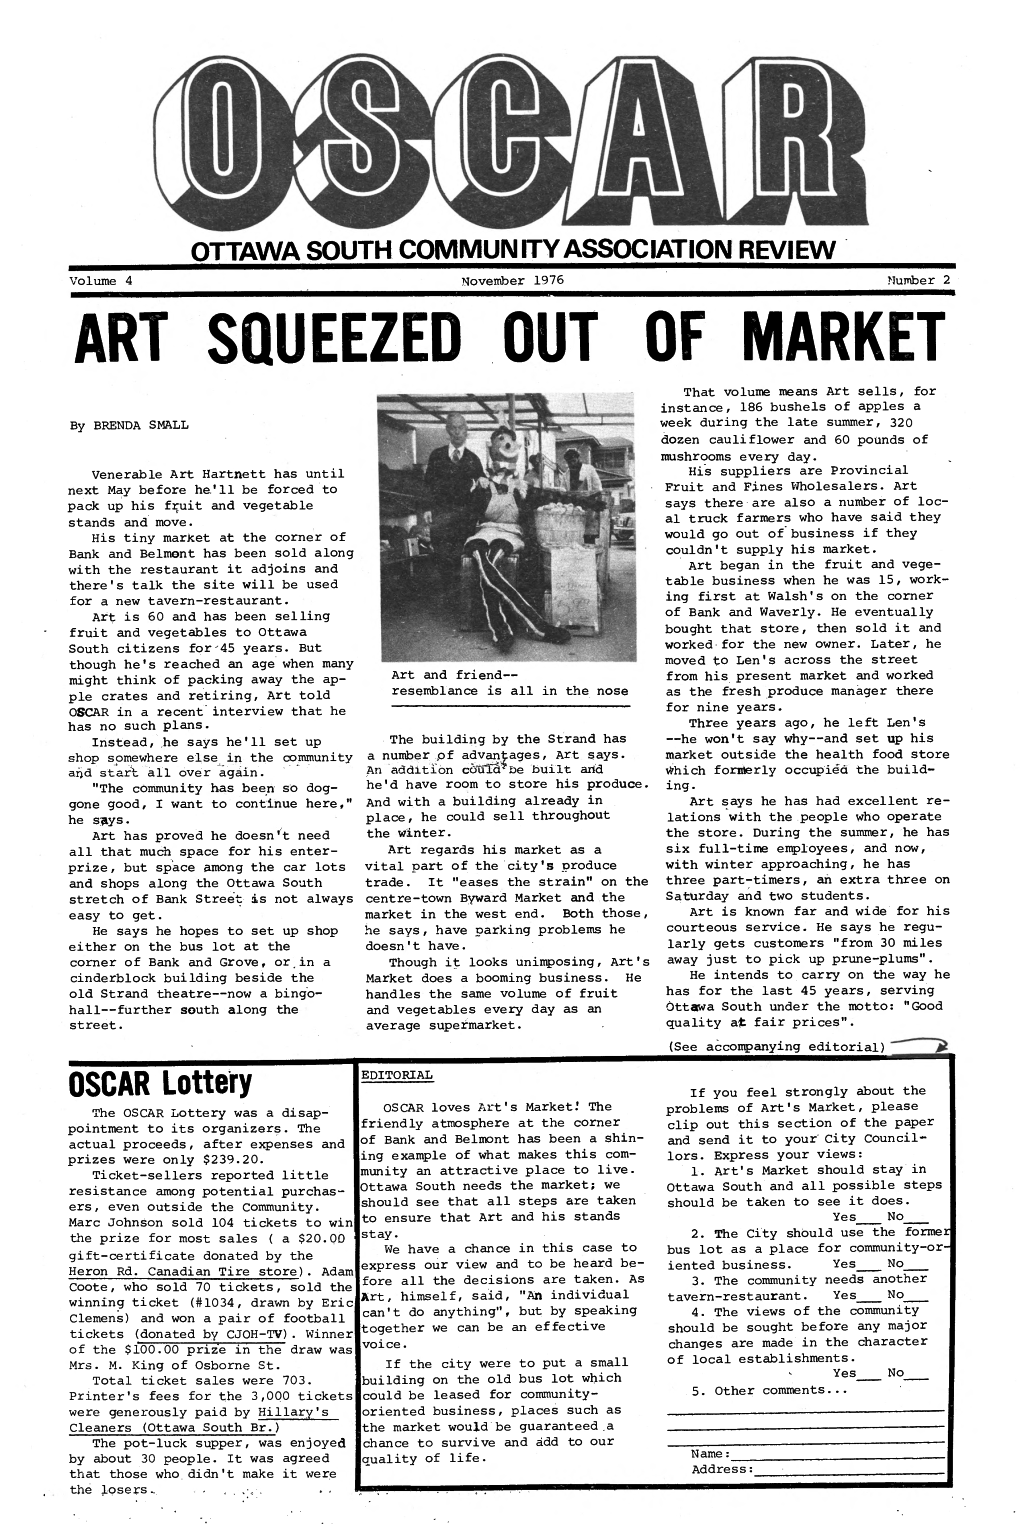 Art Squeezed out of Market